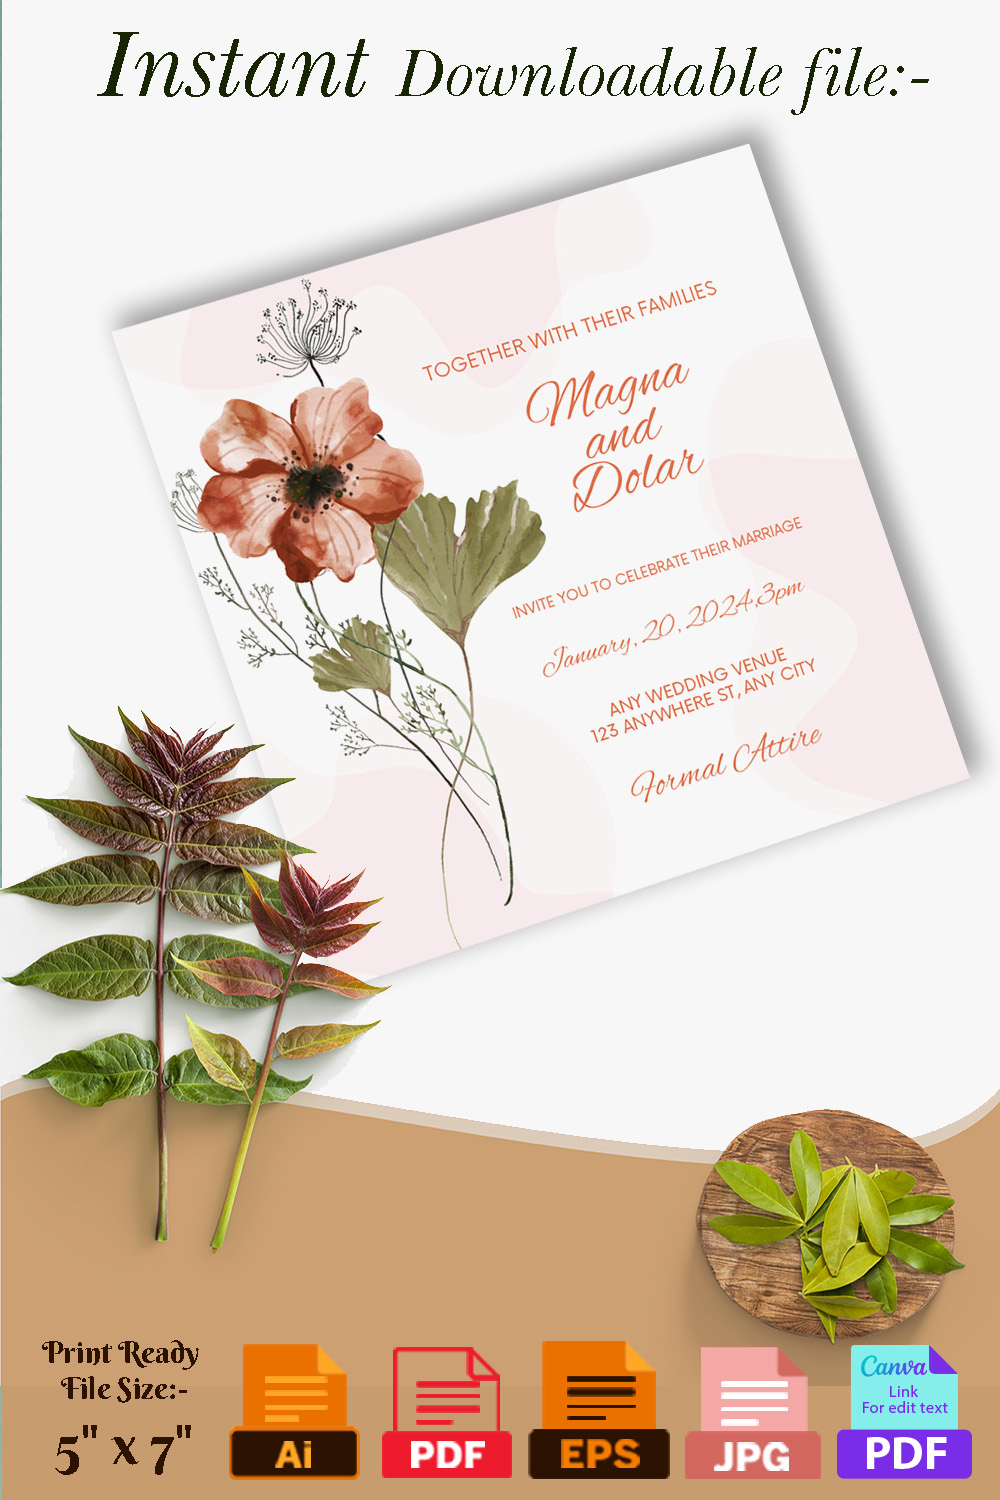 Fashion Flowers with Leaves Wedding Invitations Pinterest collage image.